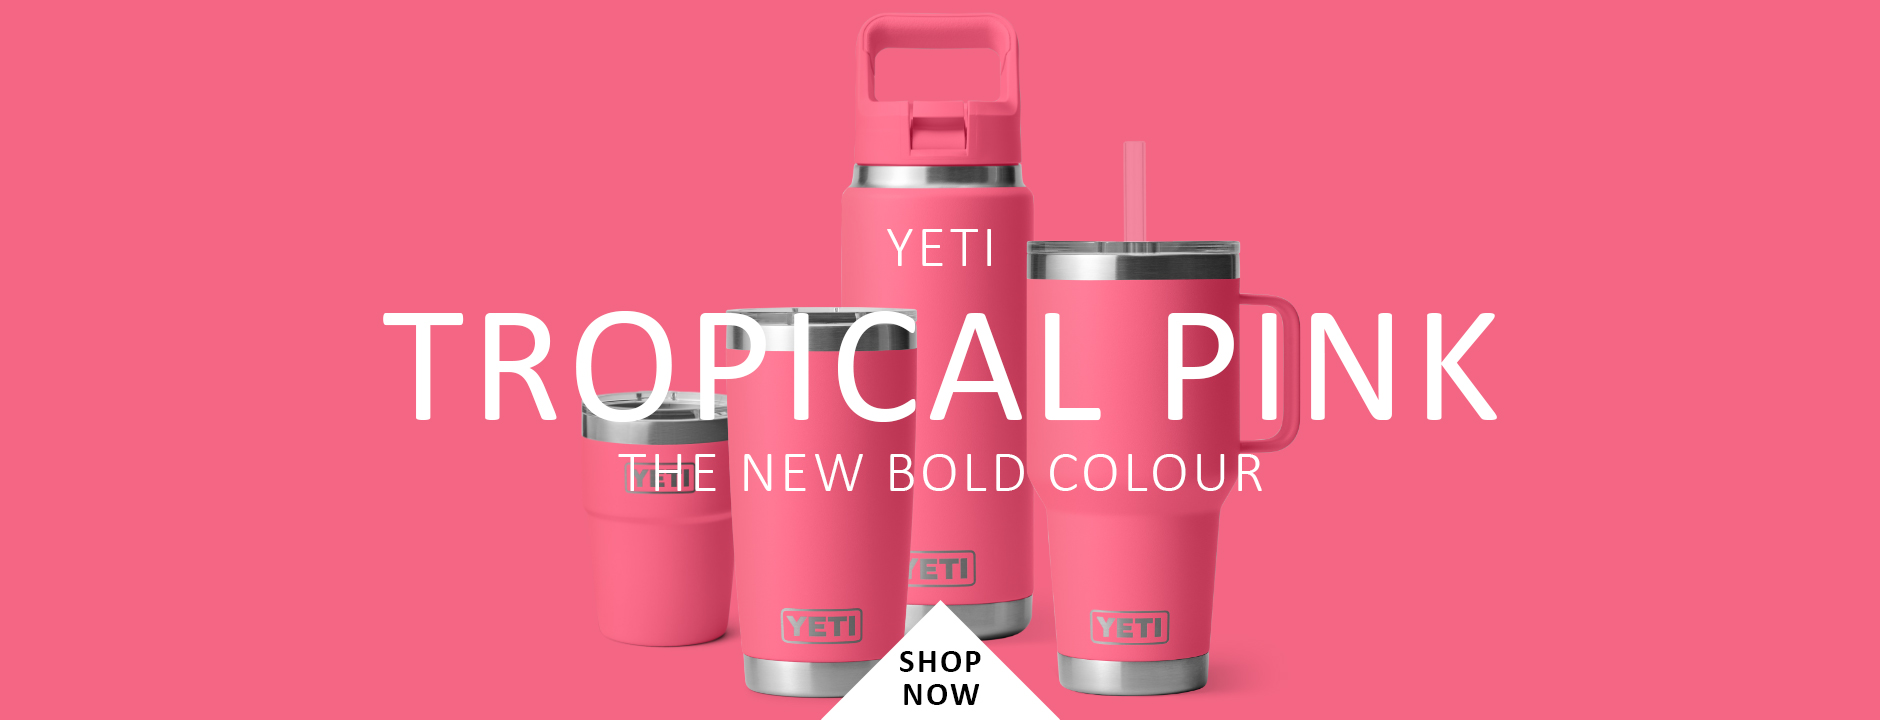 Yeti Tropical Pink Colour